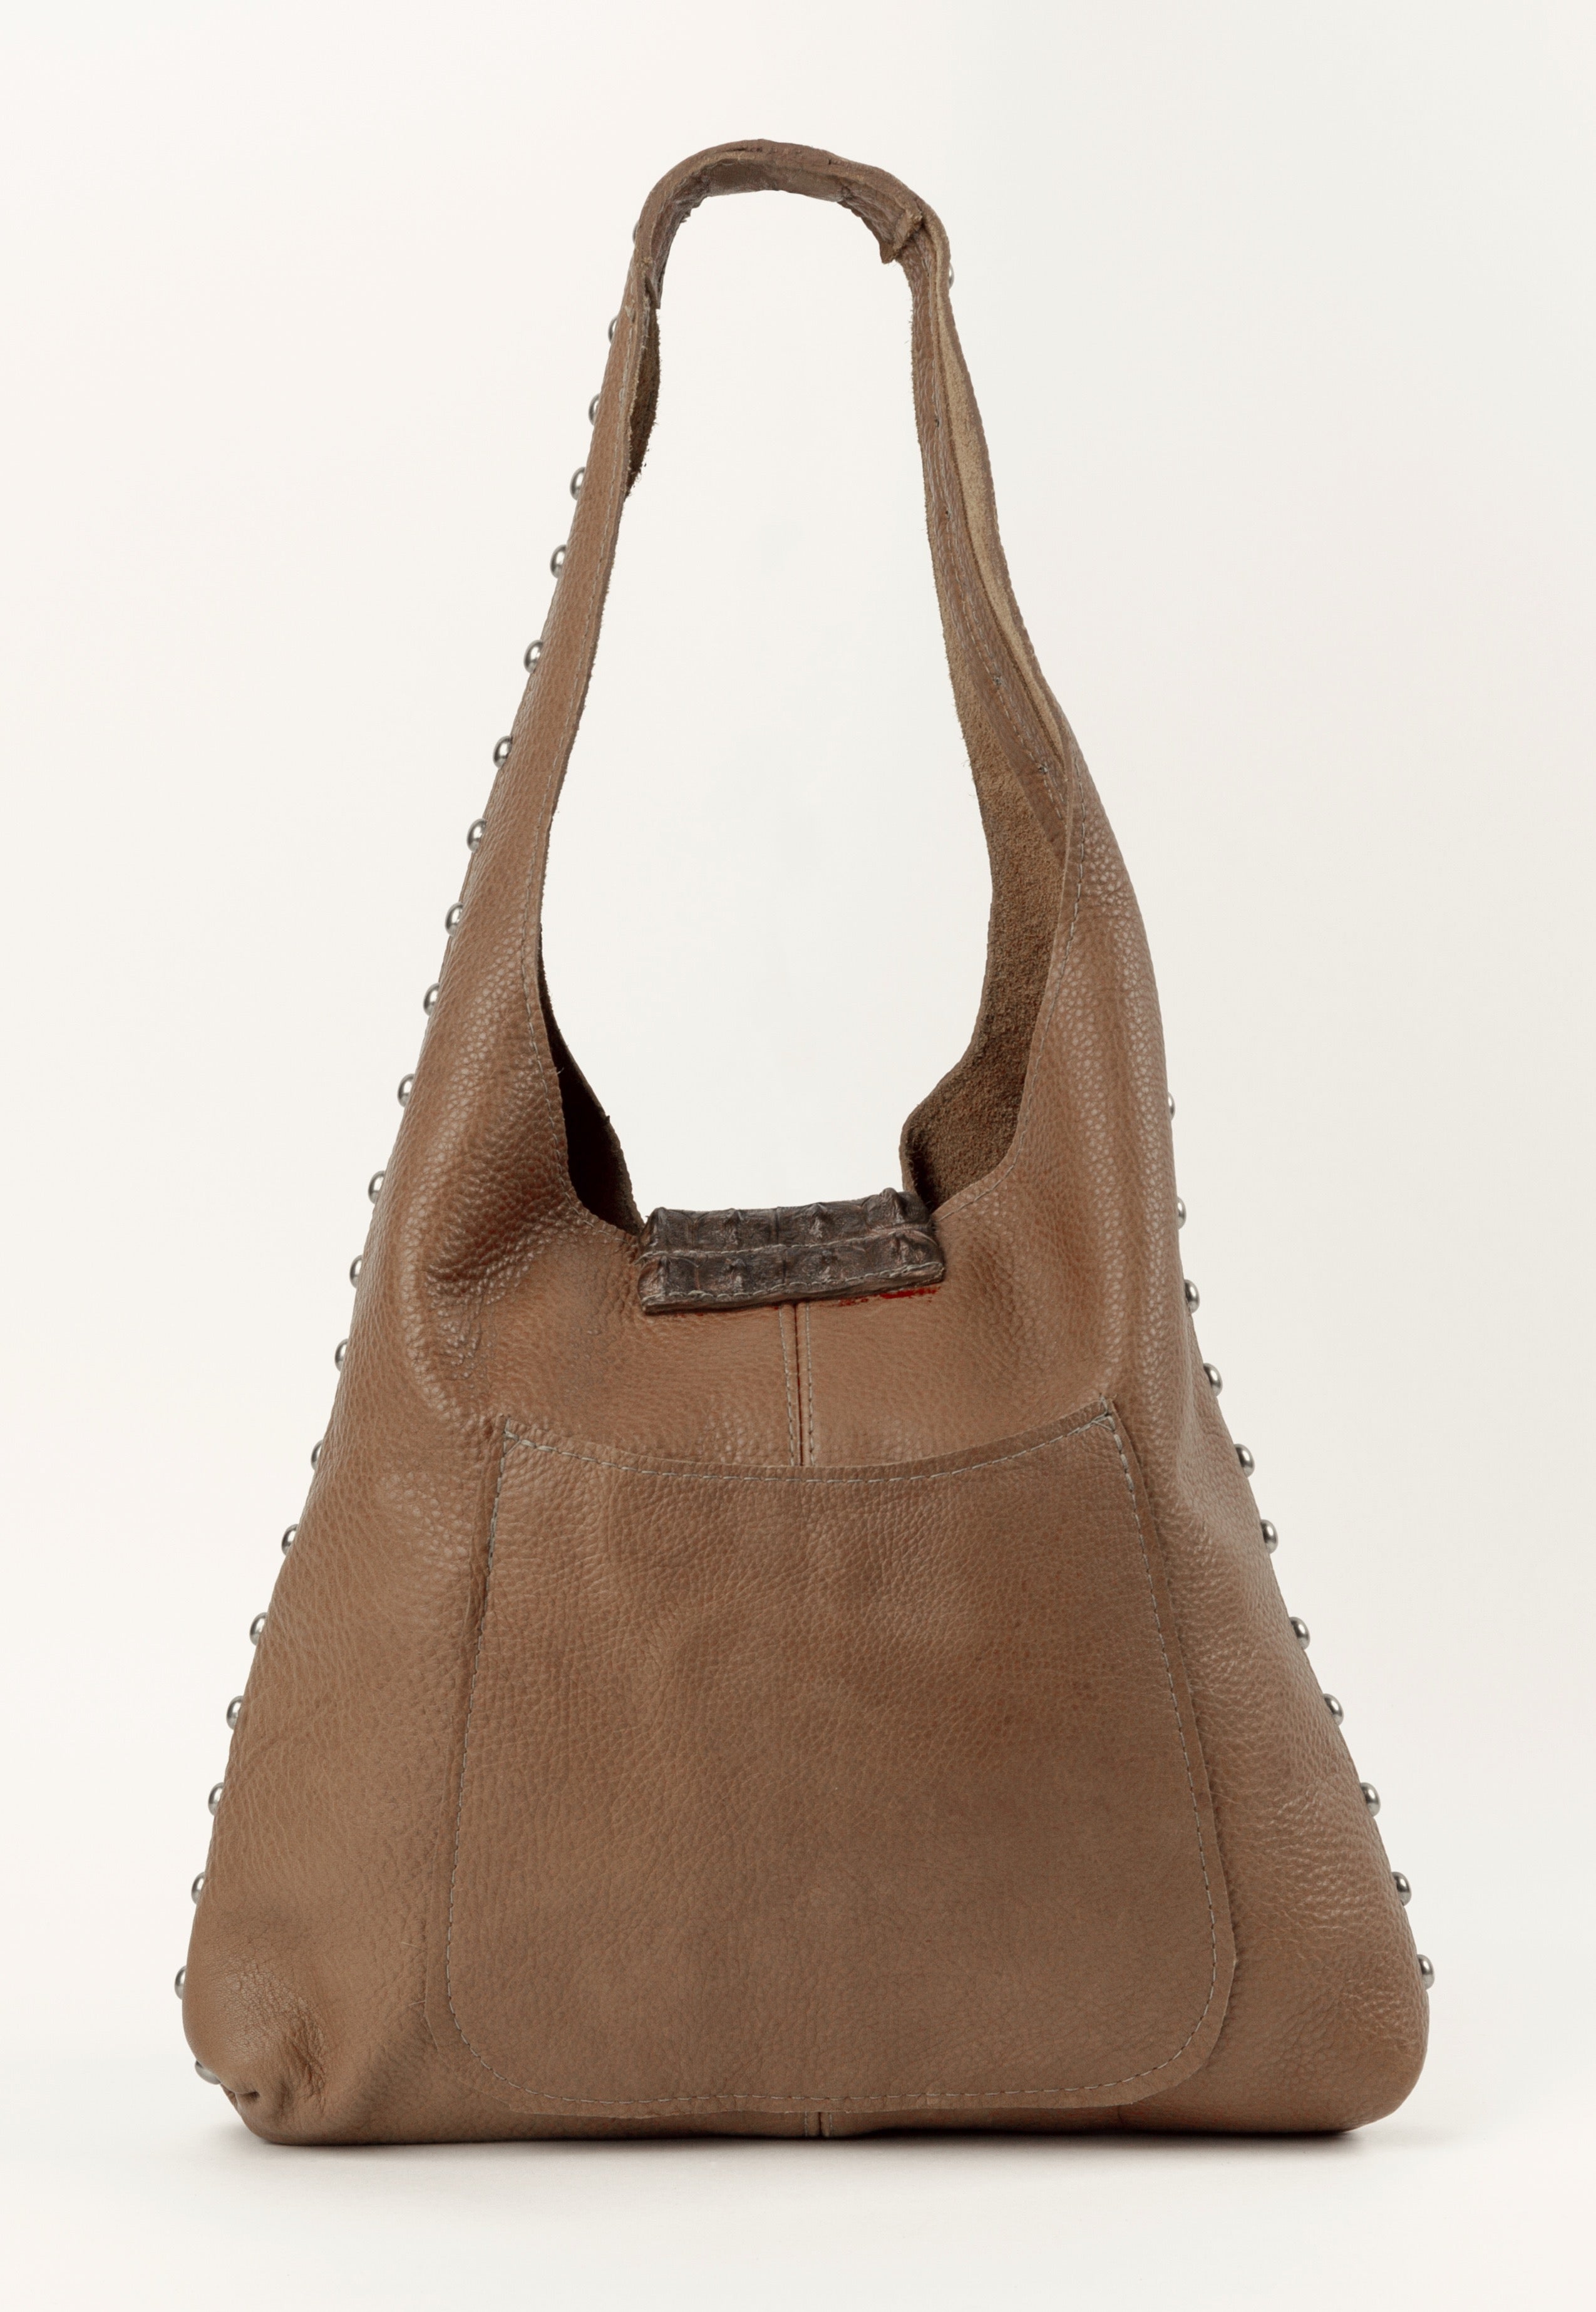 Tan leather short slouch bag